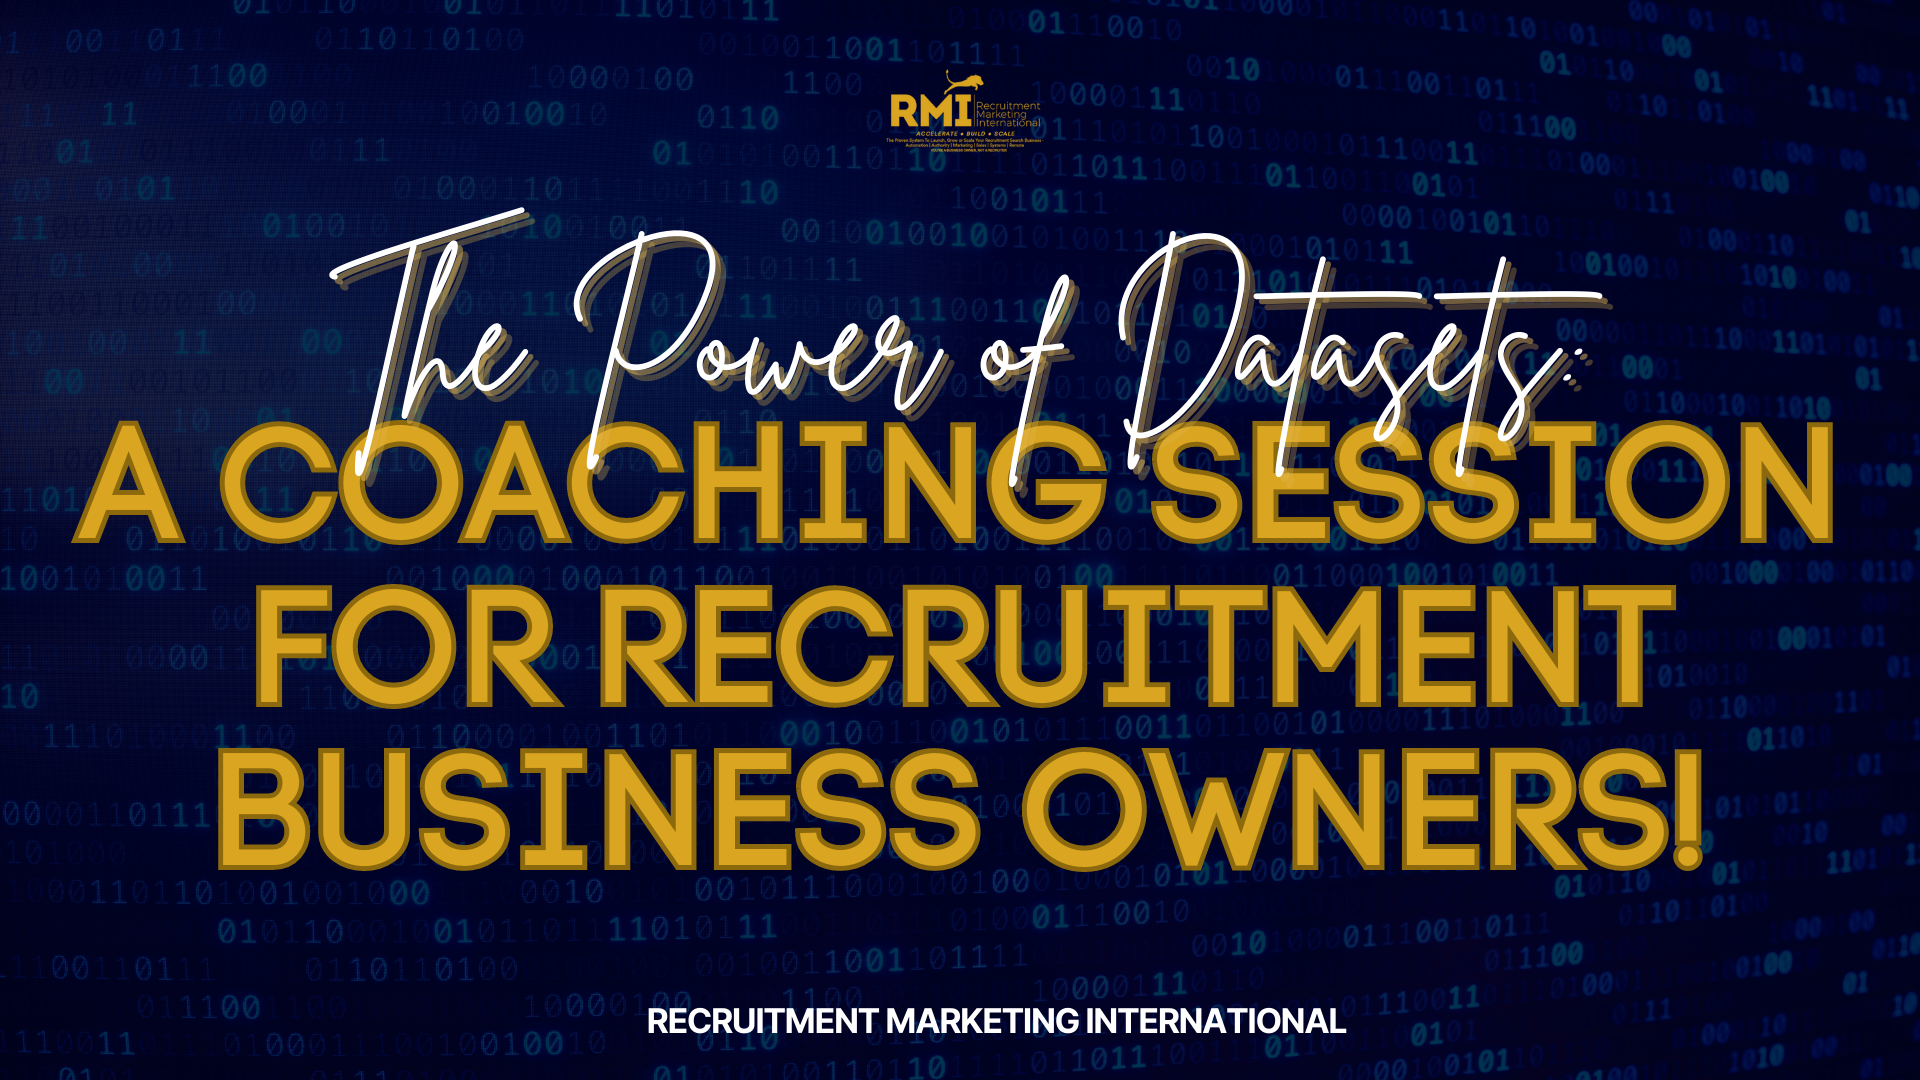 PODCAST 234 – THE POWER OF DATASETS: A COACHING SESSION FOR RECRUITMENT BUSINESS OWNERS